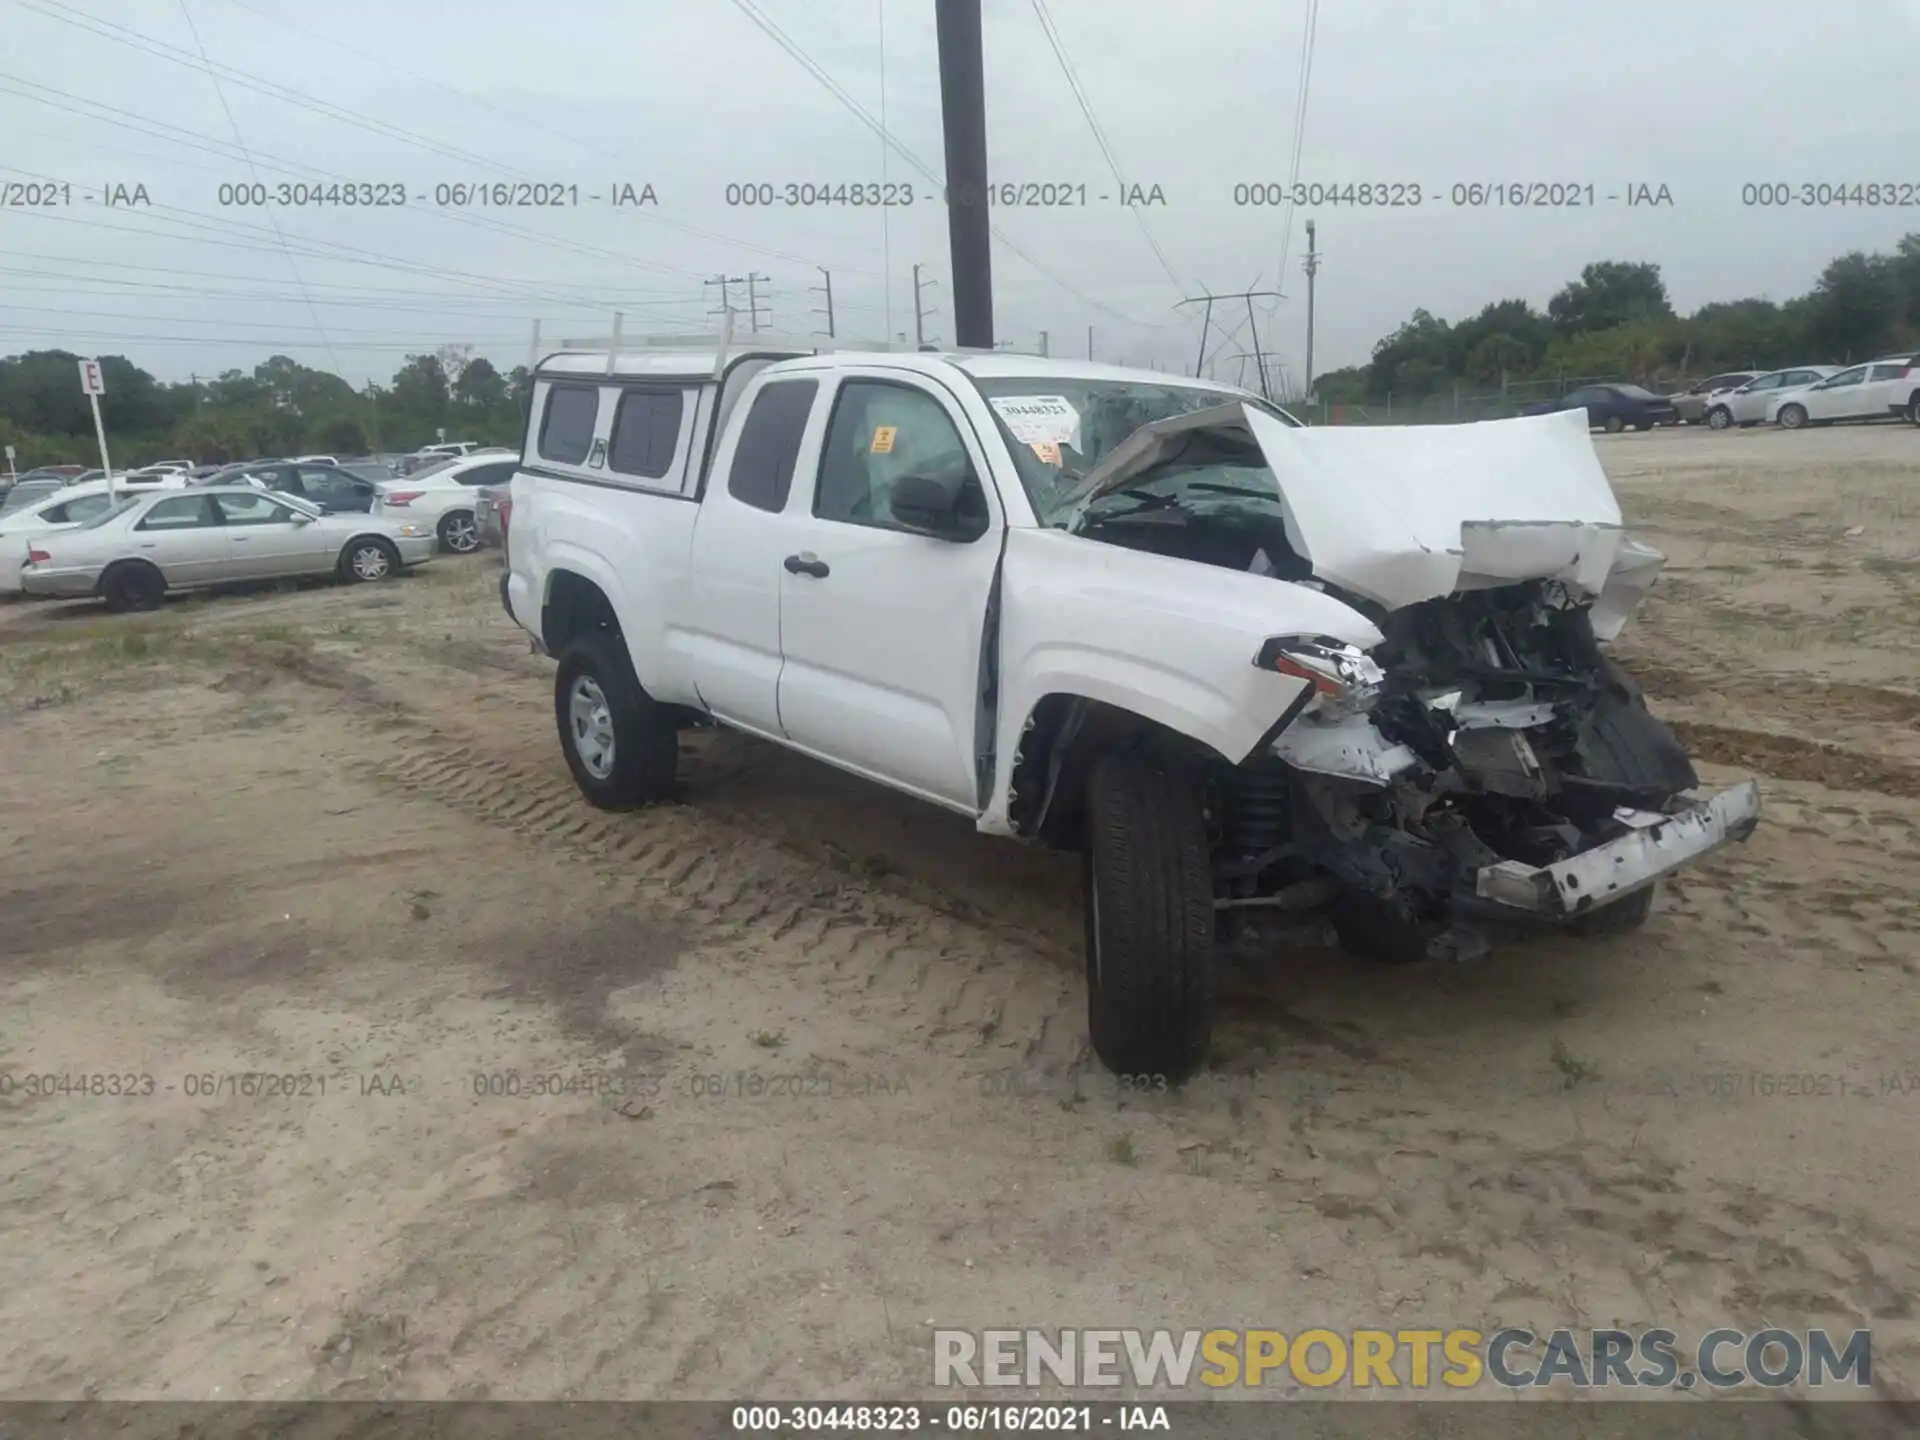 1 Photograph of a damaged car 5TFRX5GN0LX182666 TOYOTA TACOMA 2WD 2020